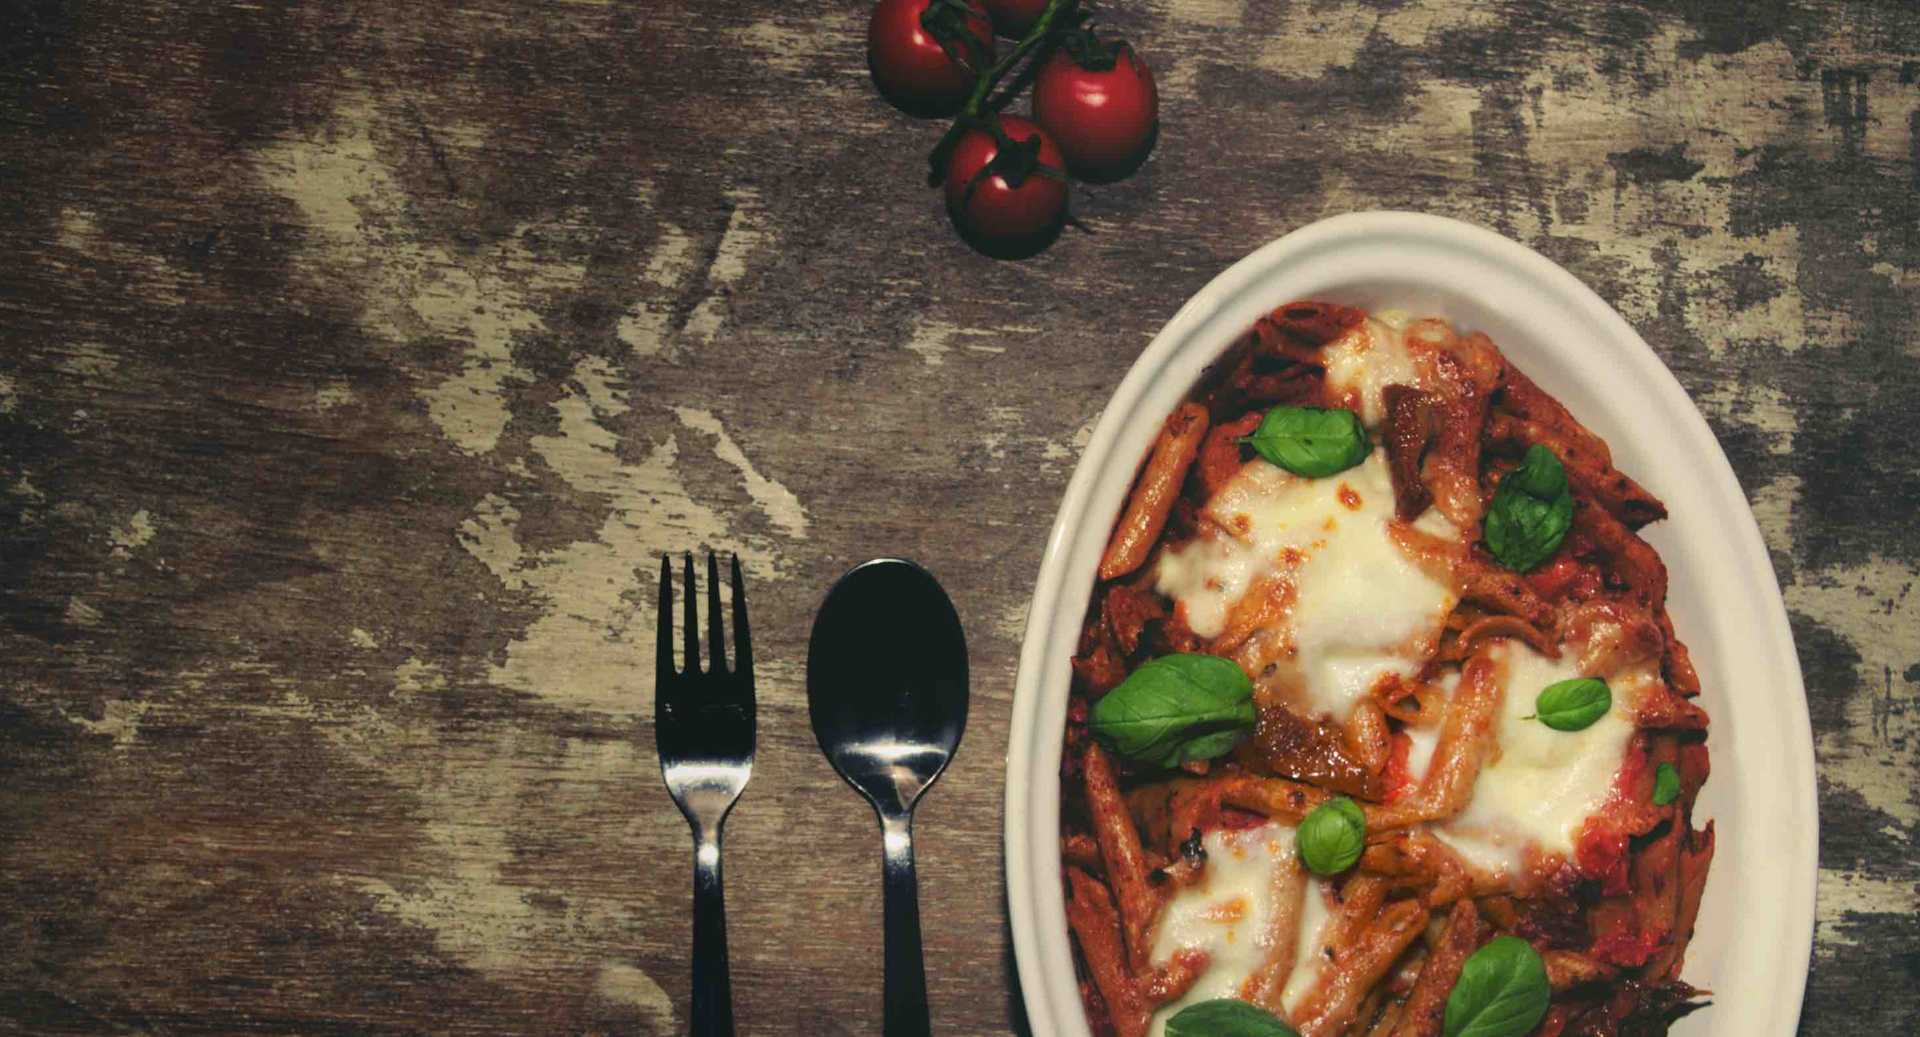 Mouth watering vegetarian pasta bake with rich tomato sauce and cheese toppings